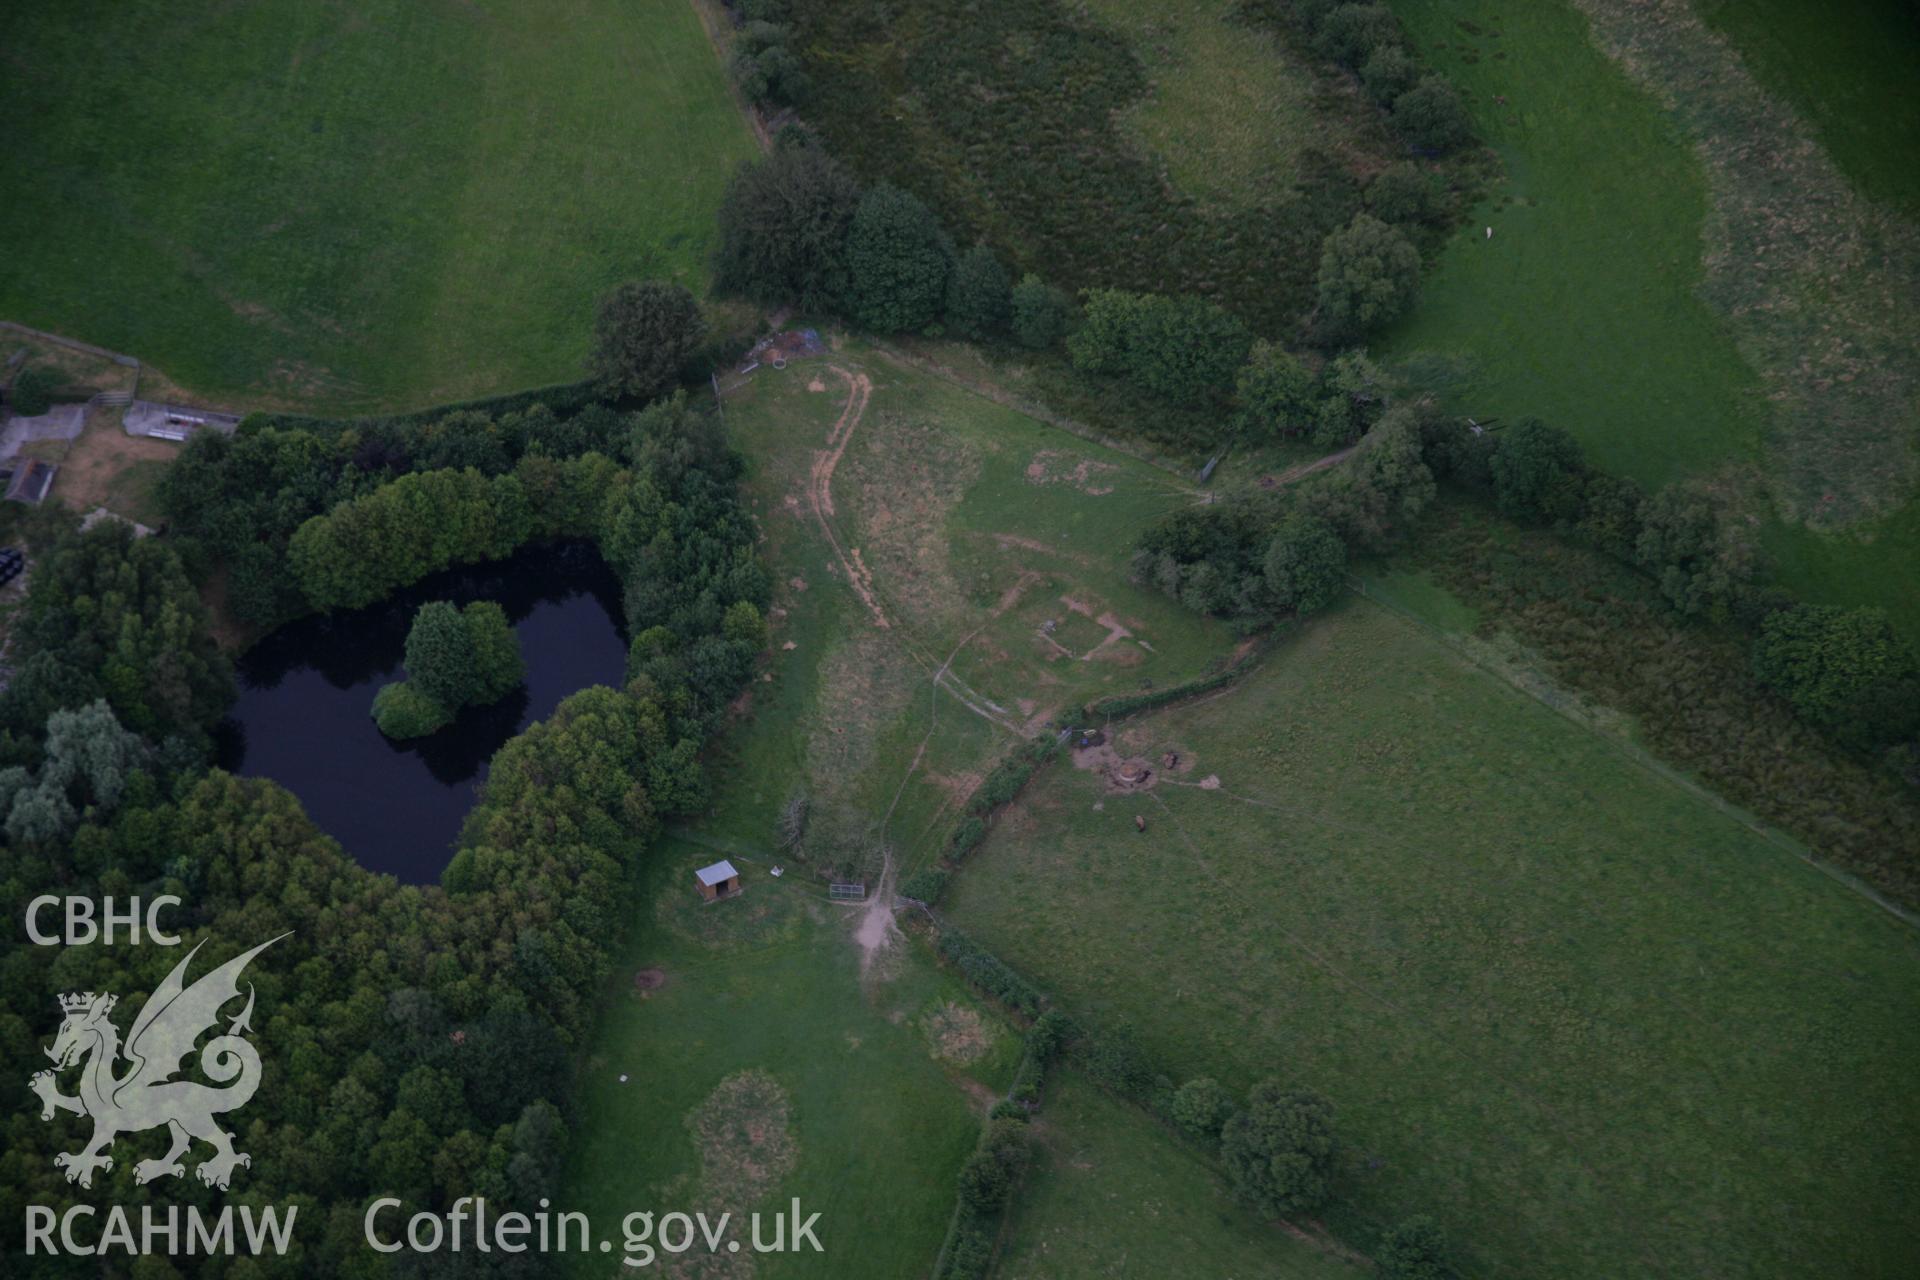 RCAHMW colour oblique aerial photograph of Llanio Roman Fort and bath house. Taken on 27 July 2006 by Toby Driver.